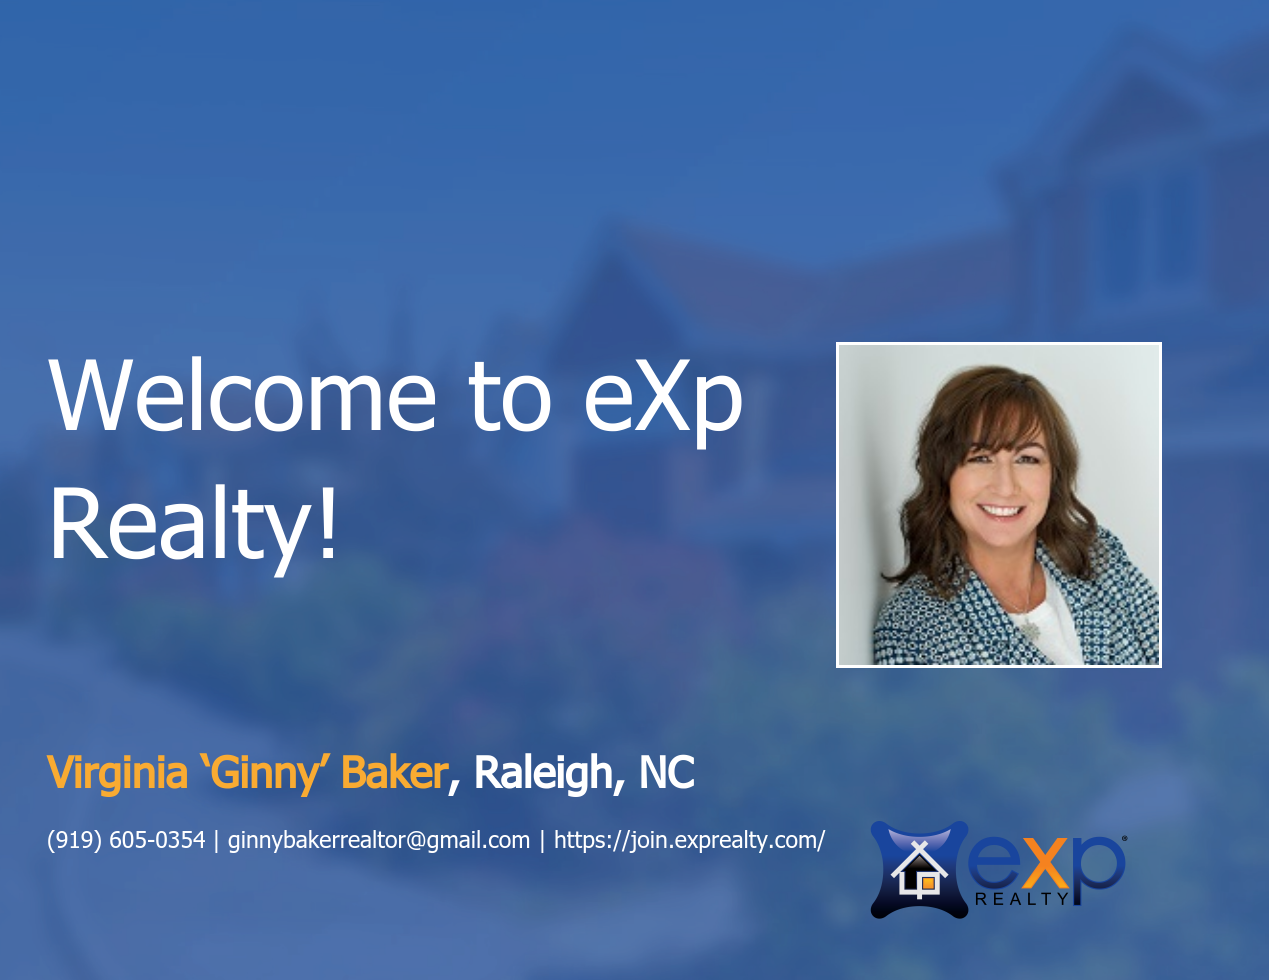 Welcome to eXp Realty Virginia ‘Ginny’ Baker!